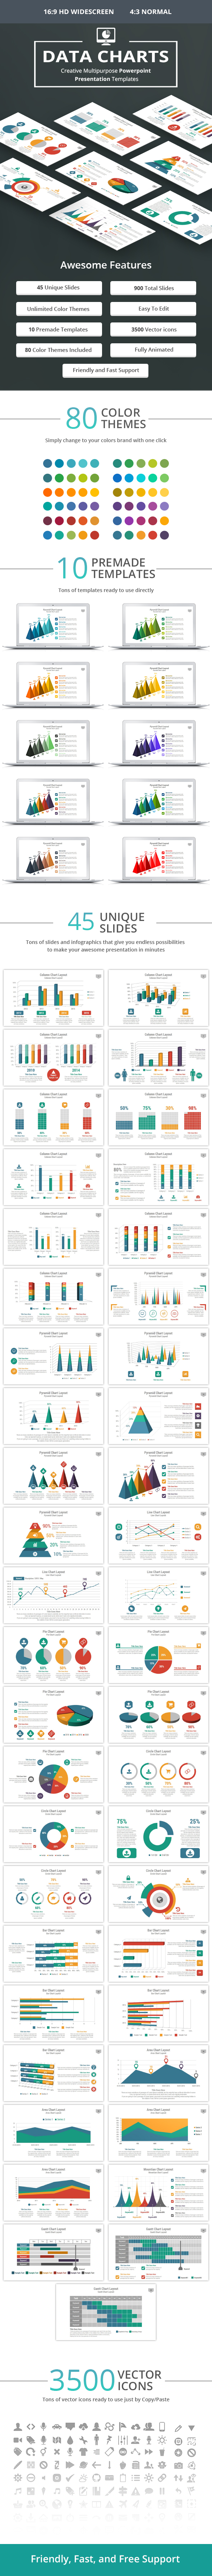 Charts PowerPoint Presentation Template